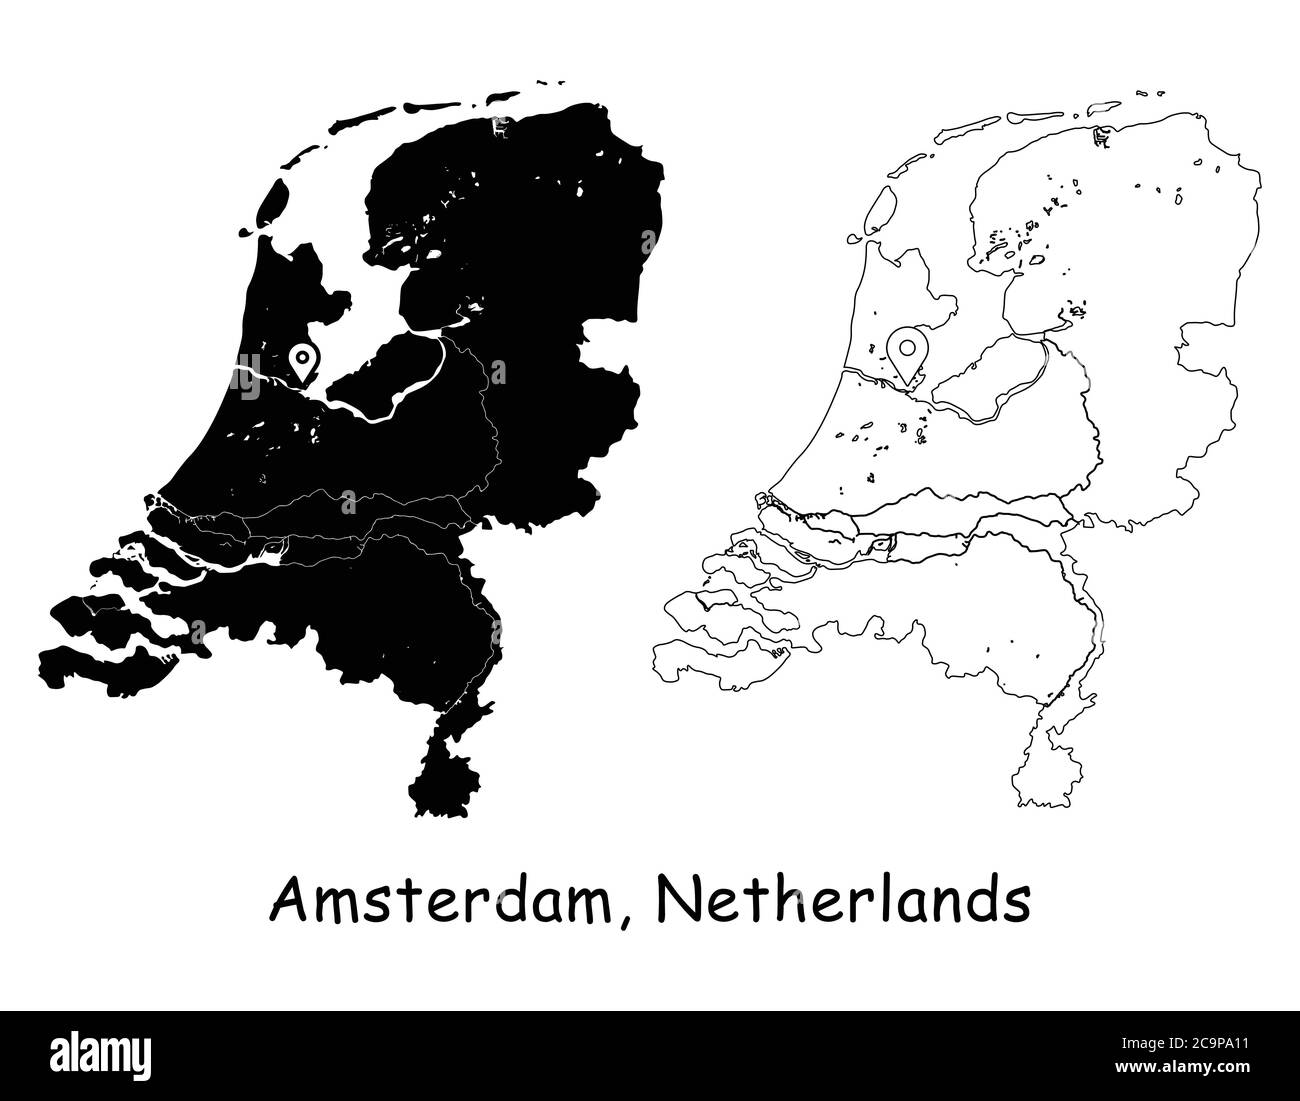 Amsterdam, Netherlands. Detailed Country Map with Location Pin on Capital City. Black silhouette and outline maps isolated on white background. EPS Ve Stock Vector